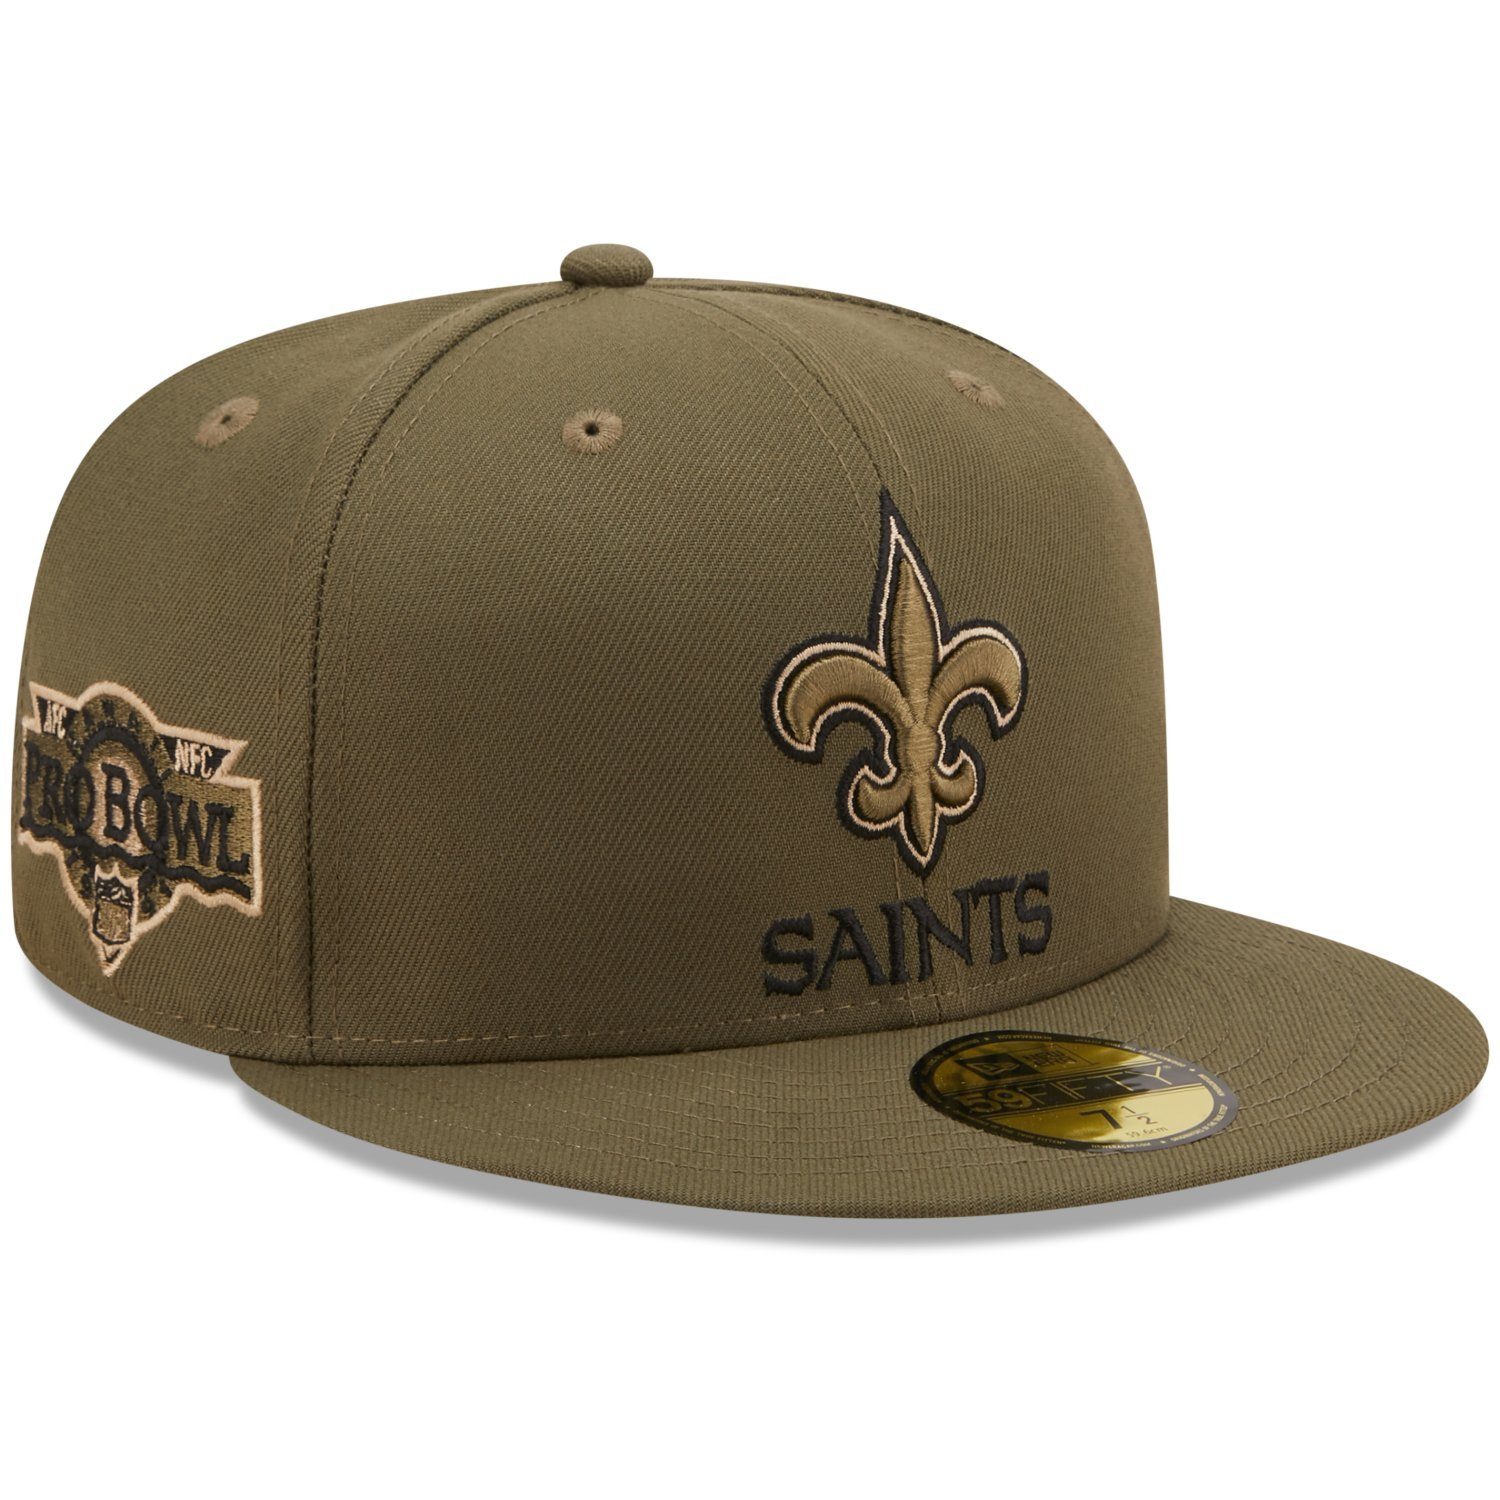 New Era Fitted Cap 59Fifty NFL Throwback Superbowl ProBowl New Orleans Saints